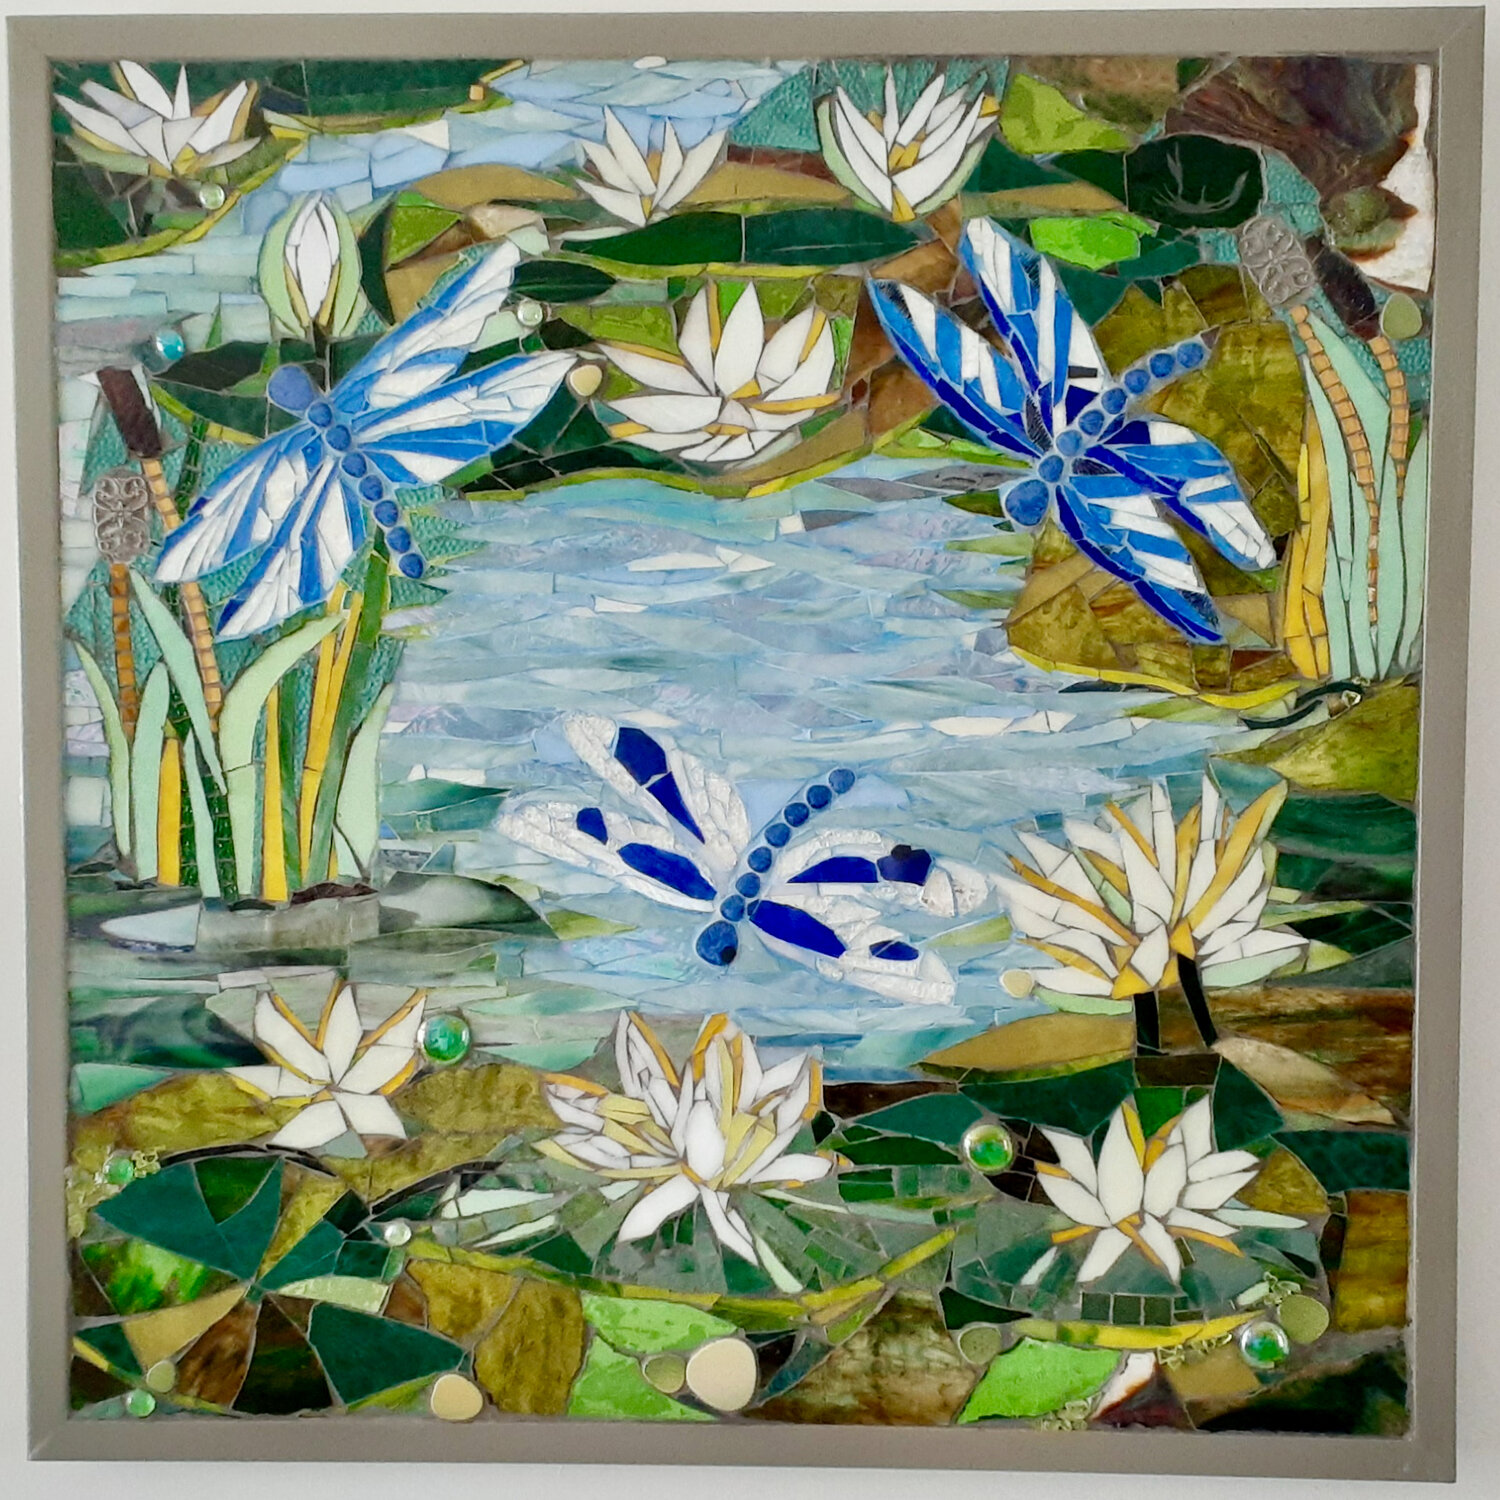 Pam Watroba's mosaics will be on display in the Main Street Gallery's "No Limits" exhibit.